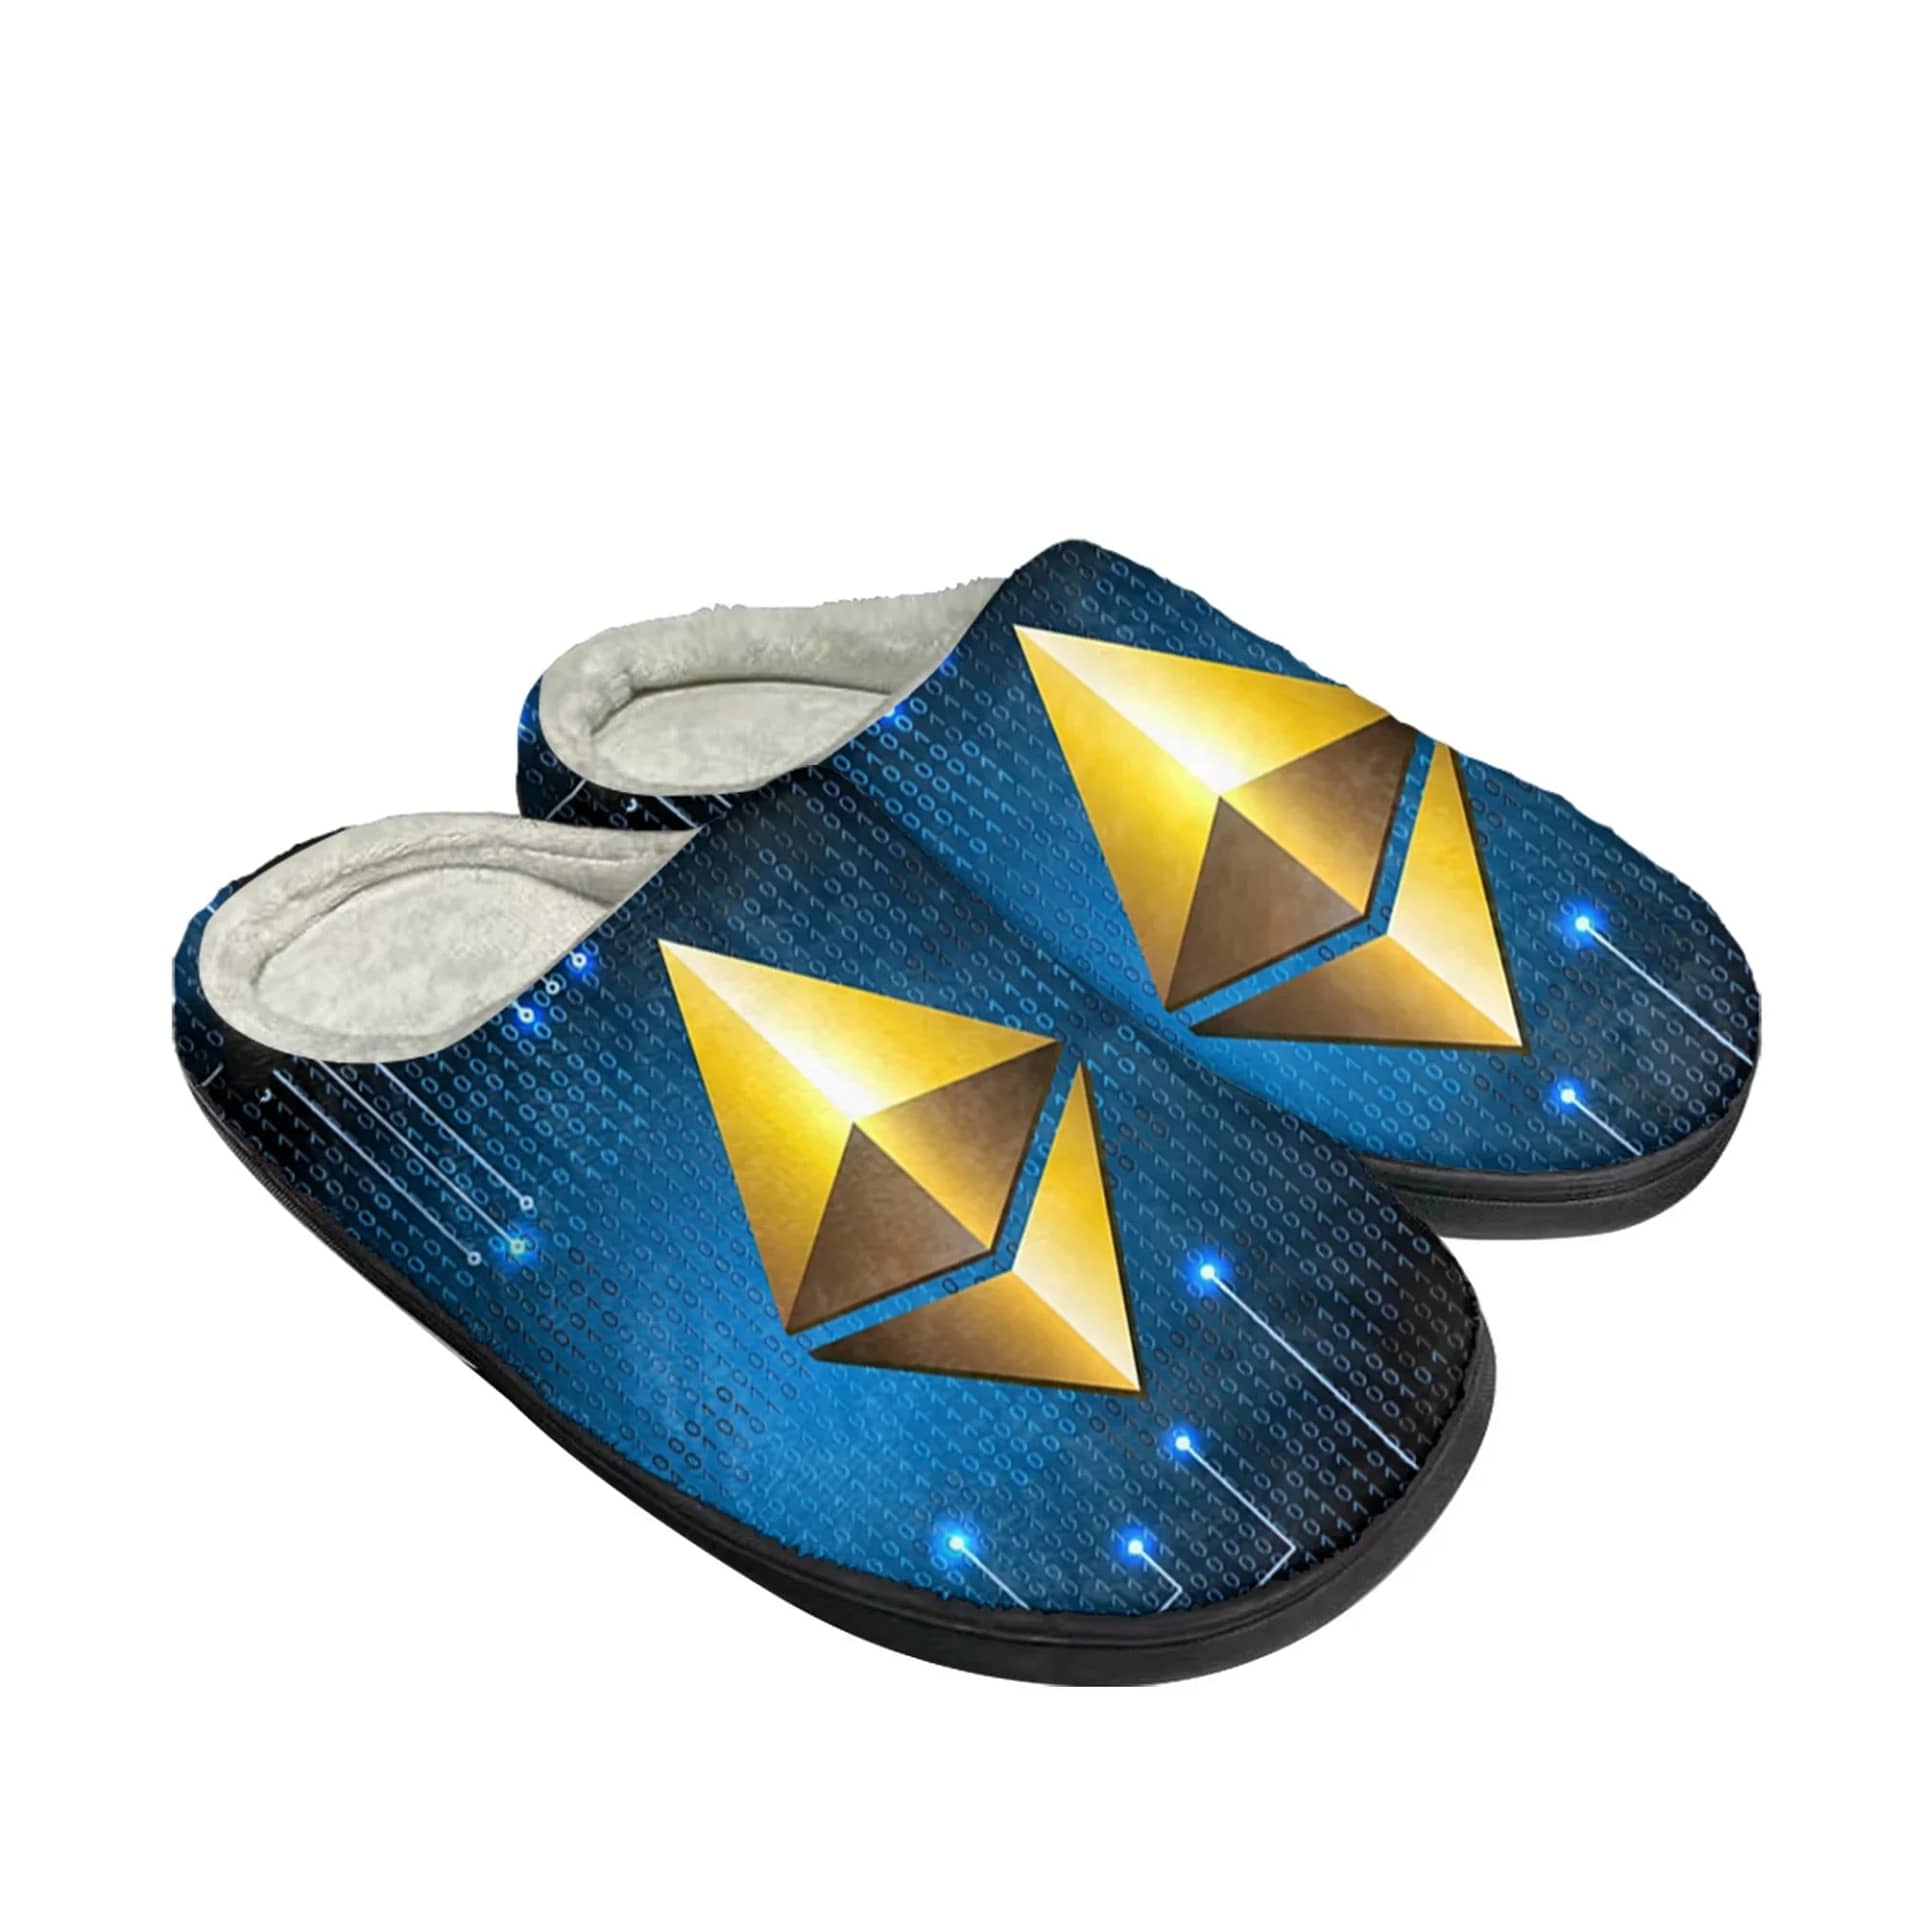 Ethereum Cryptocurrency Eth Coin Shoes Slippers